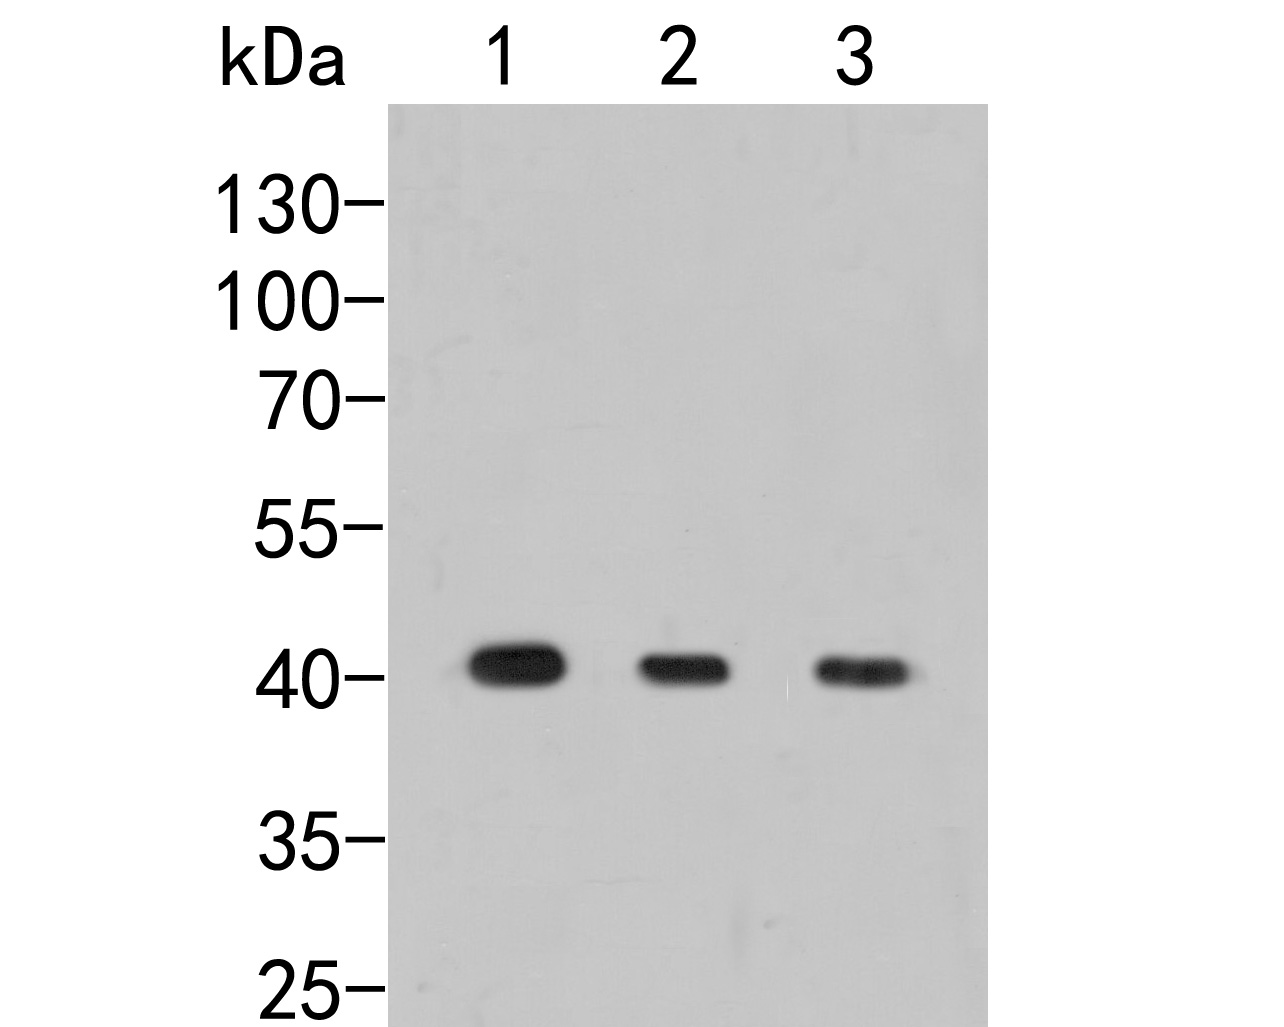 Western blot analysis of Pleckstrin on different lysates. Proteins were transferred to a PVDF membrane and blocked with 5% BSA in PBS for 1 hour at room temperature. The primary antibody (ER2001-67, 1/1000) was used in 5% BSA at room temperature for 2 hours. Goat Anti-Rabbit IgG - HRP Secondary Antibody (HA1001) at 1:5,000 dilution was used for 1 hour at room temperature.<br />
Positive control: <br />
Lane 1: U937 cell lysate<br />
Lane 2: Rat spleen tissue lysate<br />
Lane 2: Mouse brain tissue lysate